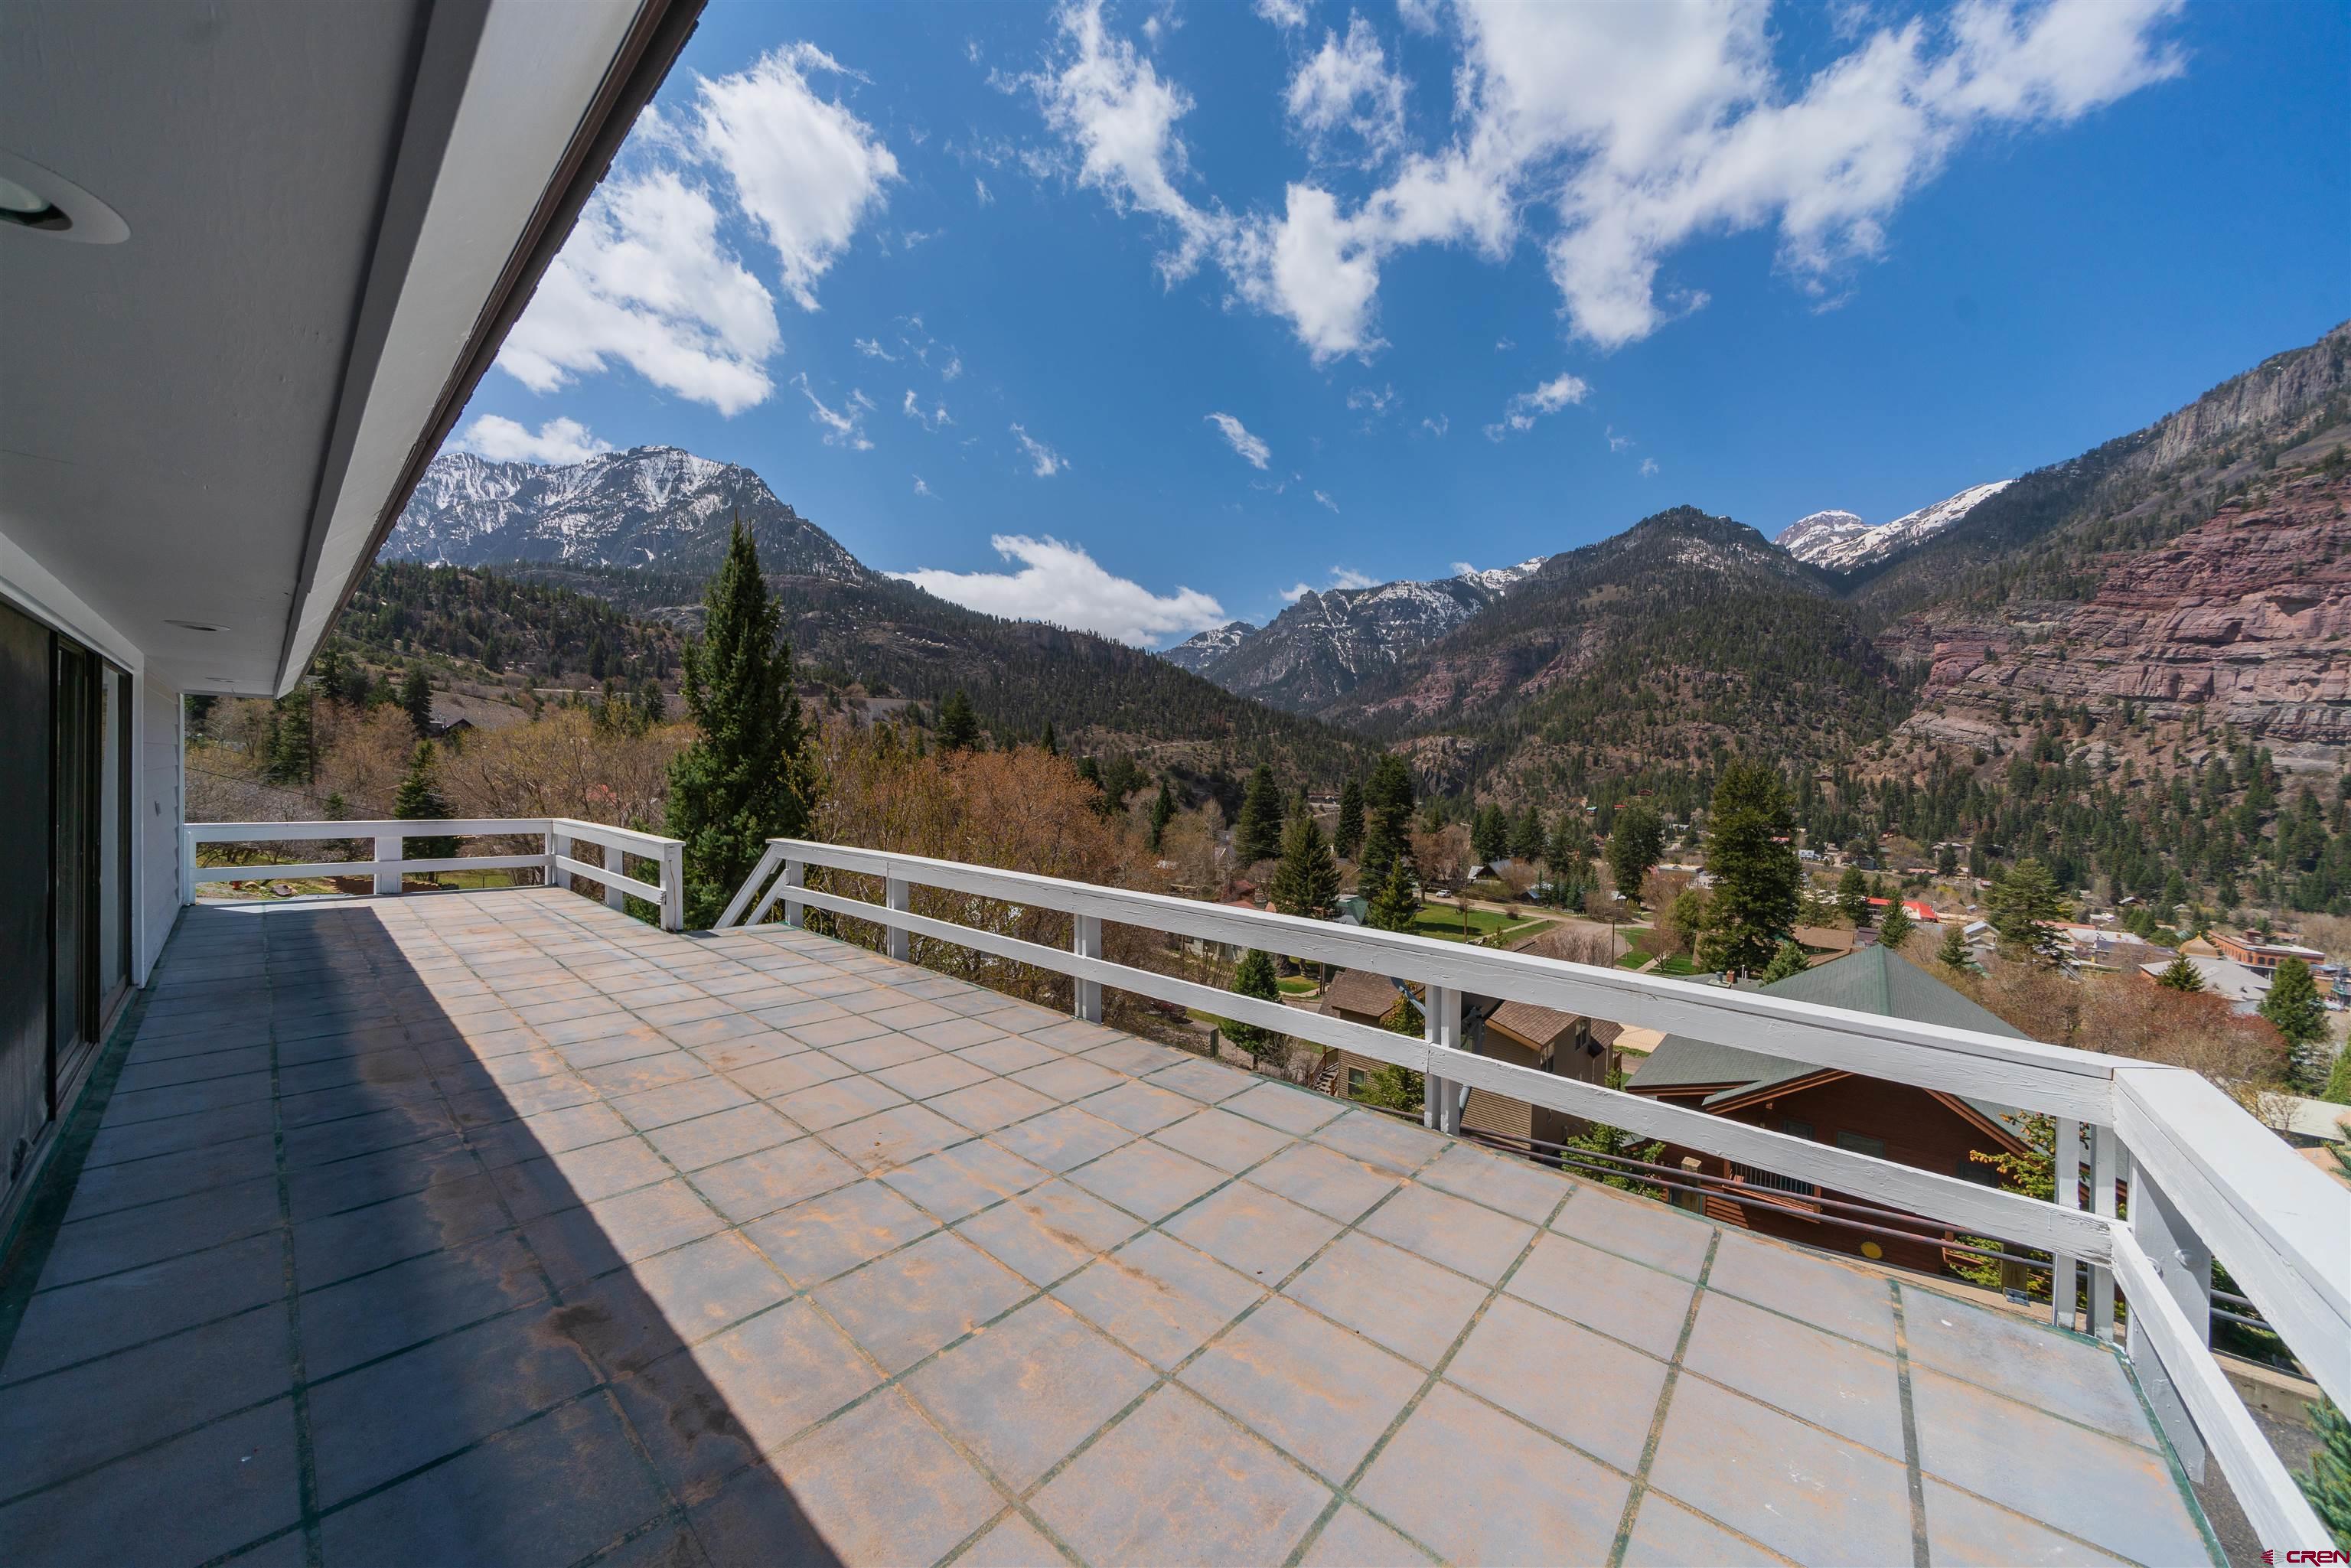 FIRST OF ALL, CONSIDER THE VIEWS FROM THIS 5,300+ SQ. FT HOME IN BEAUTIFUL DOWNTOWN OURAY.  Consider the Views from all directions.  Comtemporary Designed and built in 1972, this unique home has 5 bedrooms and 4.5 baths  with the Master Suite on the first level and four of the bedrooms on the Second level. The Master has huge his/her closets.  On the third level you will find 2 separate rooms used as office space, hobby space, library or just about anything you need.  Down stairs leads you to ground level where you find a large den/family room with a wood burning fireplace, 1/2 bath and exit to the 3 car garage.  Storage throughout this large home is incredible.  The Kitchen and living room display the beautiful hardwood floors, wood trim and T&G ceilings all in good condition.  There is a small bar/ice maker in a closet off of the living with a stereo system....definitely from the 70' s.  The living has an newer pellet stove fireplace.   The heat is Electric baseboard with the pellet stove and wood fireplace.  From the downstairs you can also access the back gardens landscaped with a flagstone patio for morning coffees or an evening cocktail hour.  The Deck, great for enterntaining overlooks the town of Ouray.  The home is Large, unique and one of a kind in Ouray.  Come and take a look.